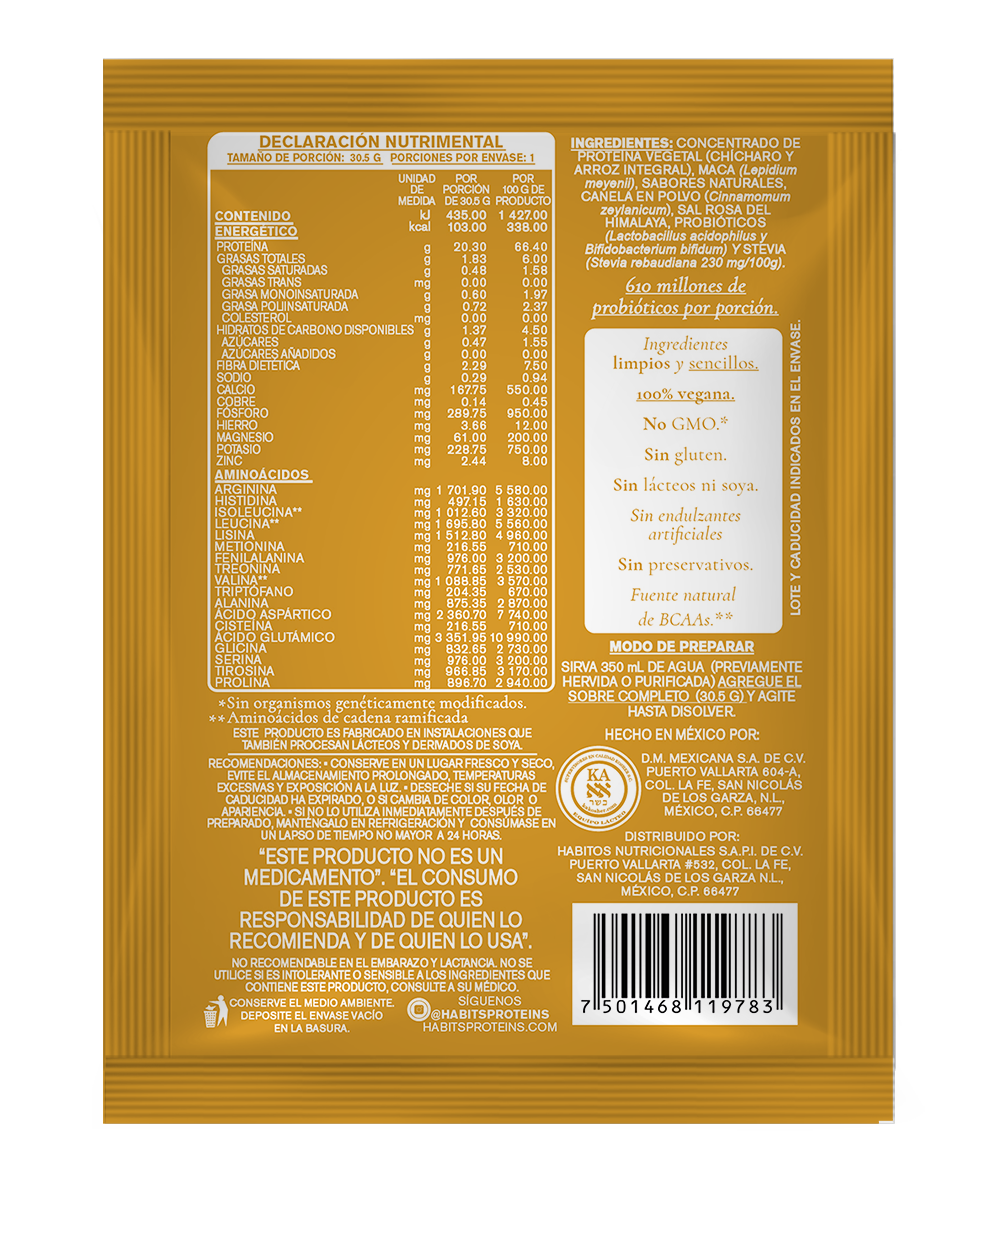 Protein Sachets Probiotic Maca Cacao